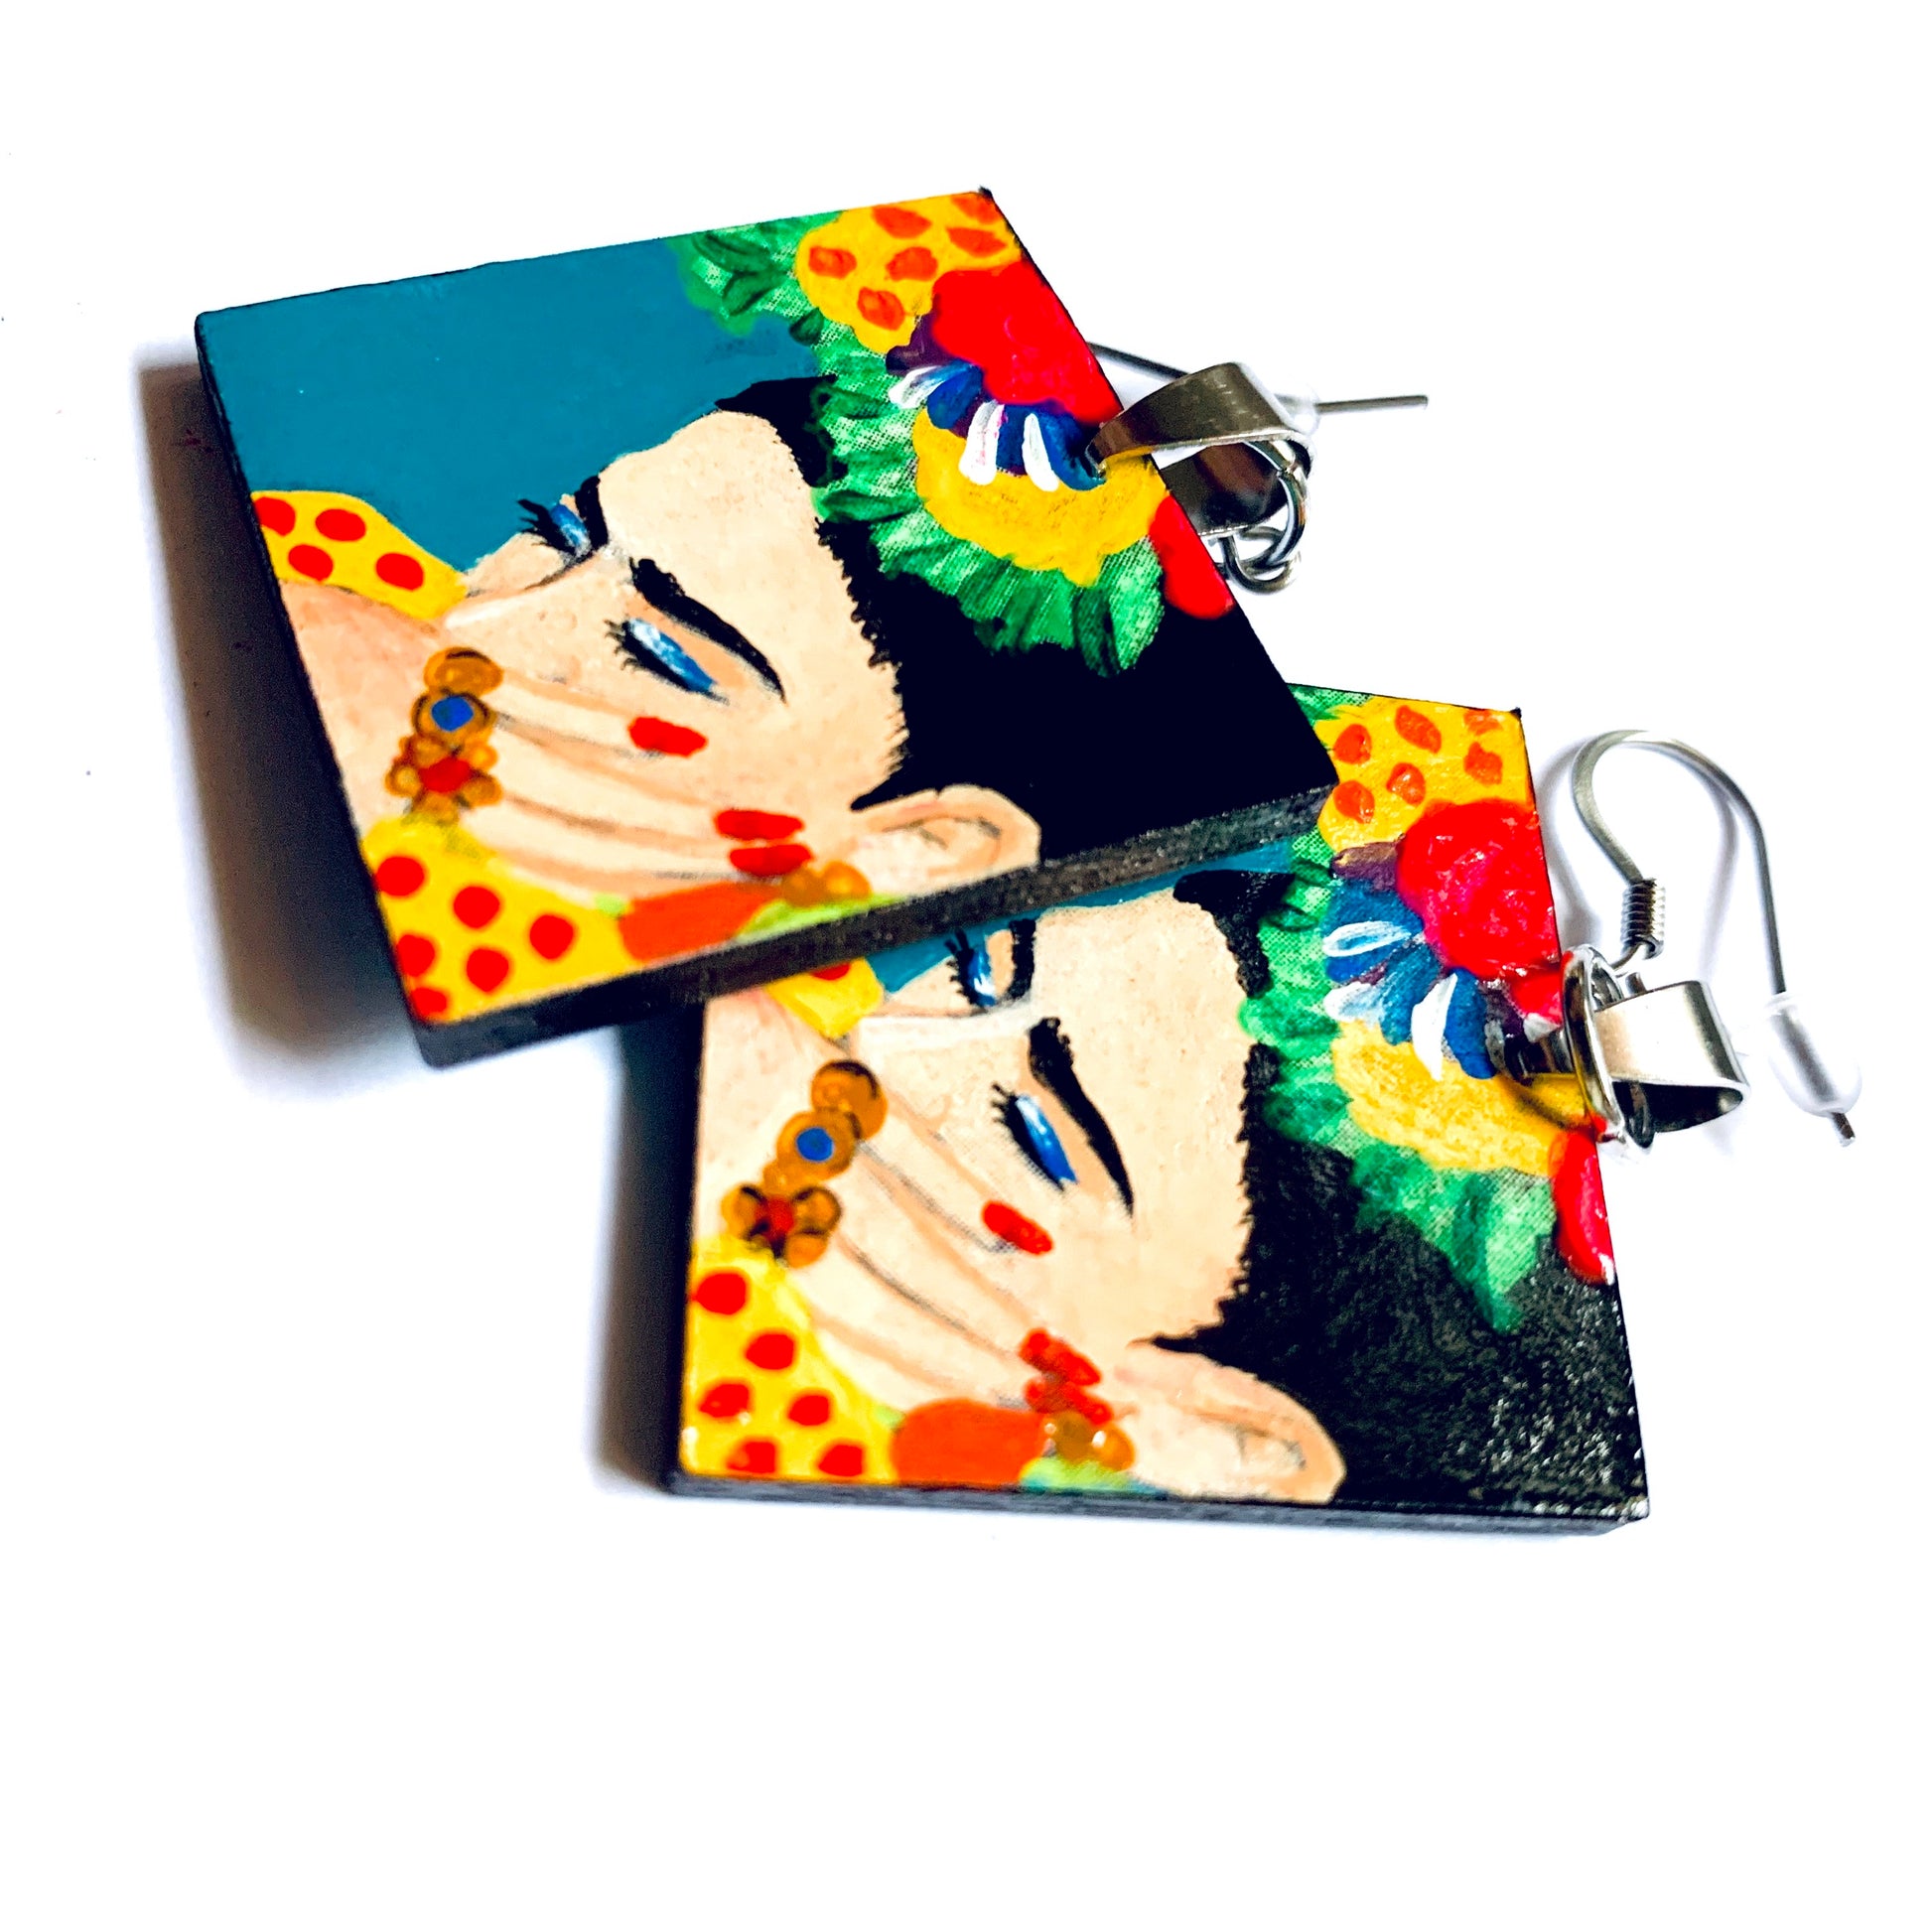 Frida Earrings: Hand Painted Frida Kahlo inspired drop and dangle wooden square earrings by Fridamaniacs for Fridalovers. Mexican jewelry Art to Wear. Women and Girls gift idea. Mexico Folk Art